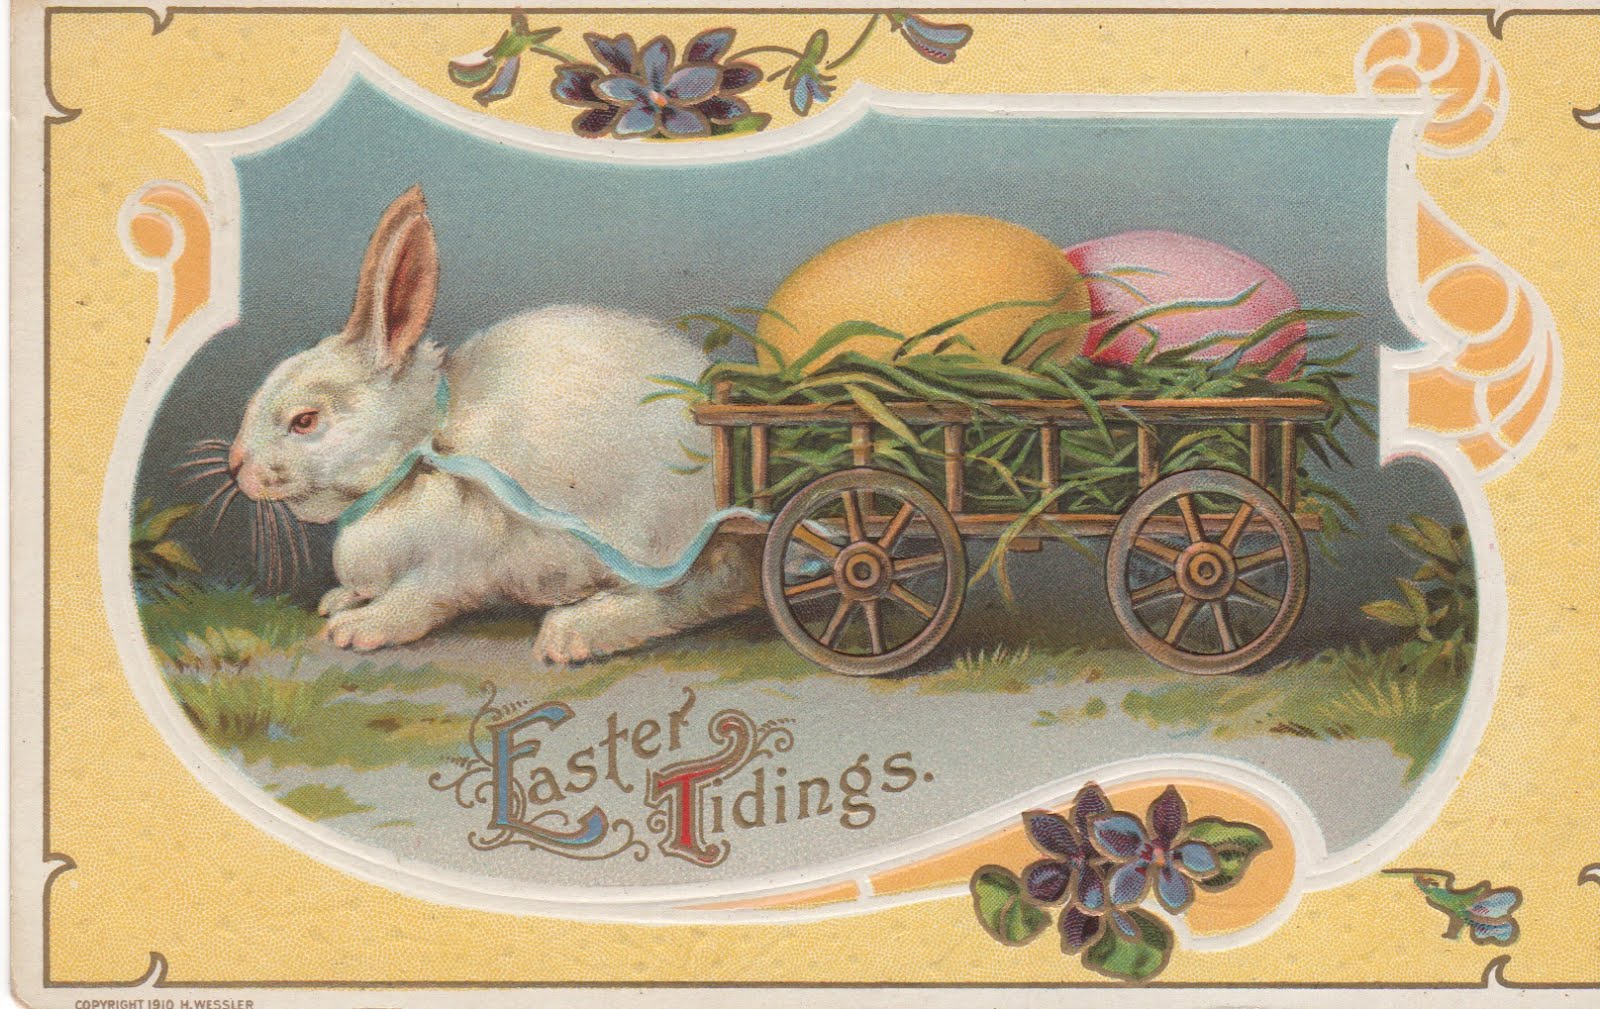 Timber Hill Threads Vintage Easter Greetings!